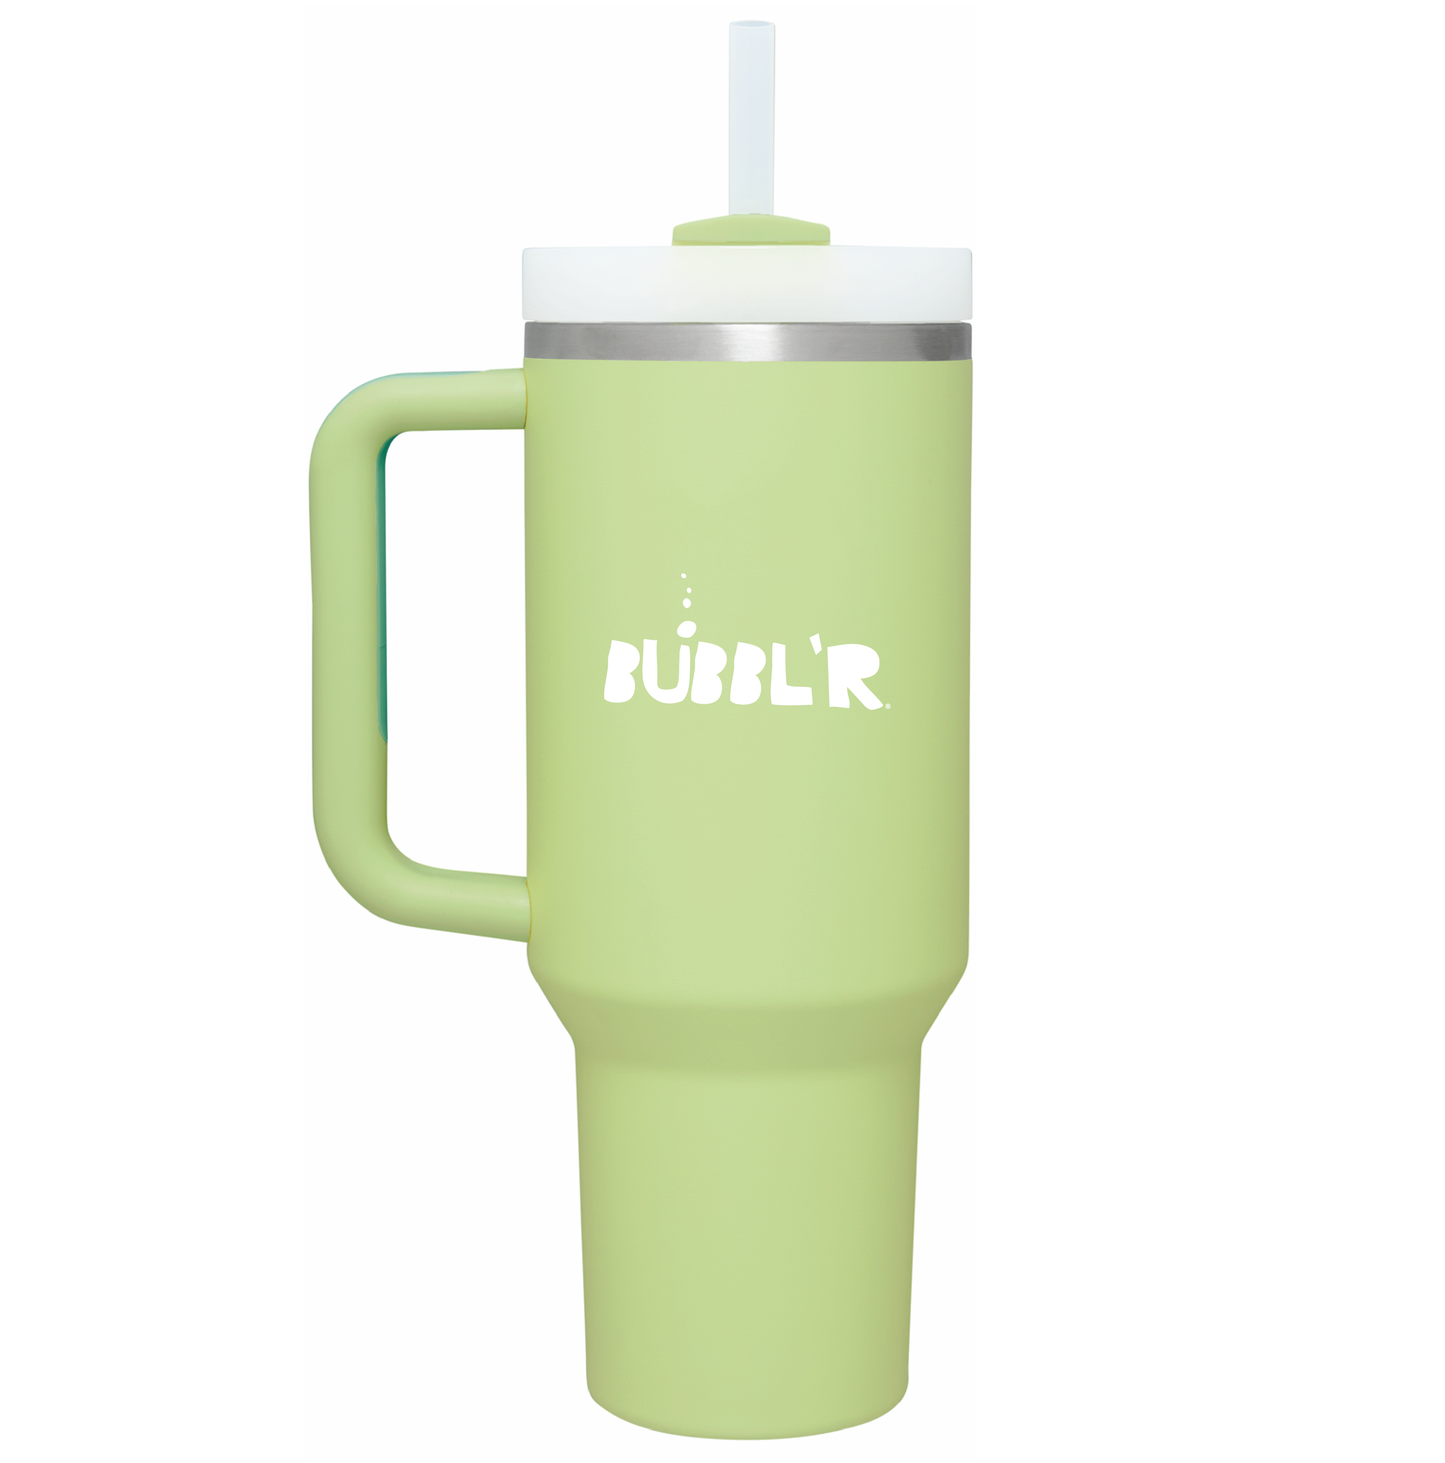 Tall lime tumbler with white bubbl'r logo in center